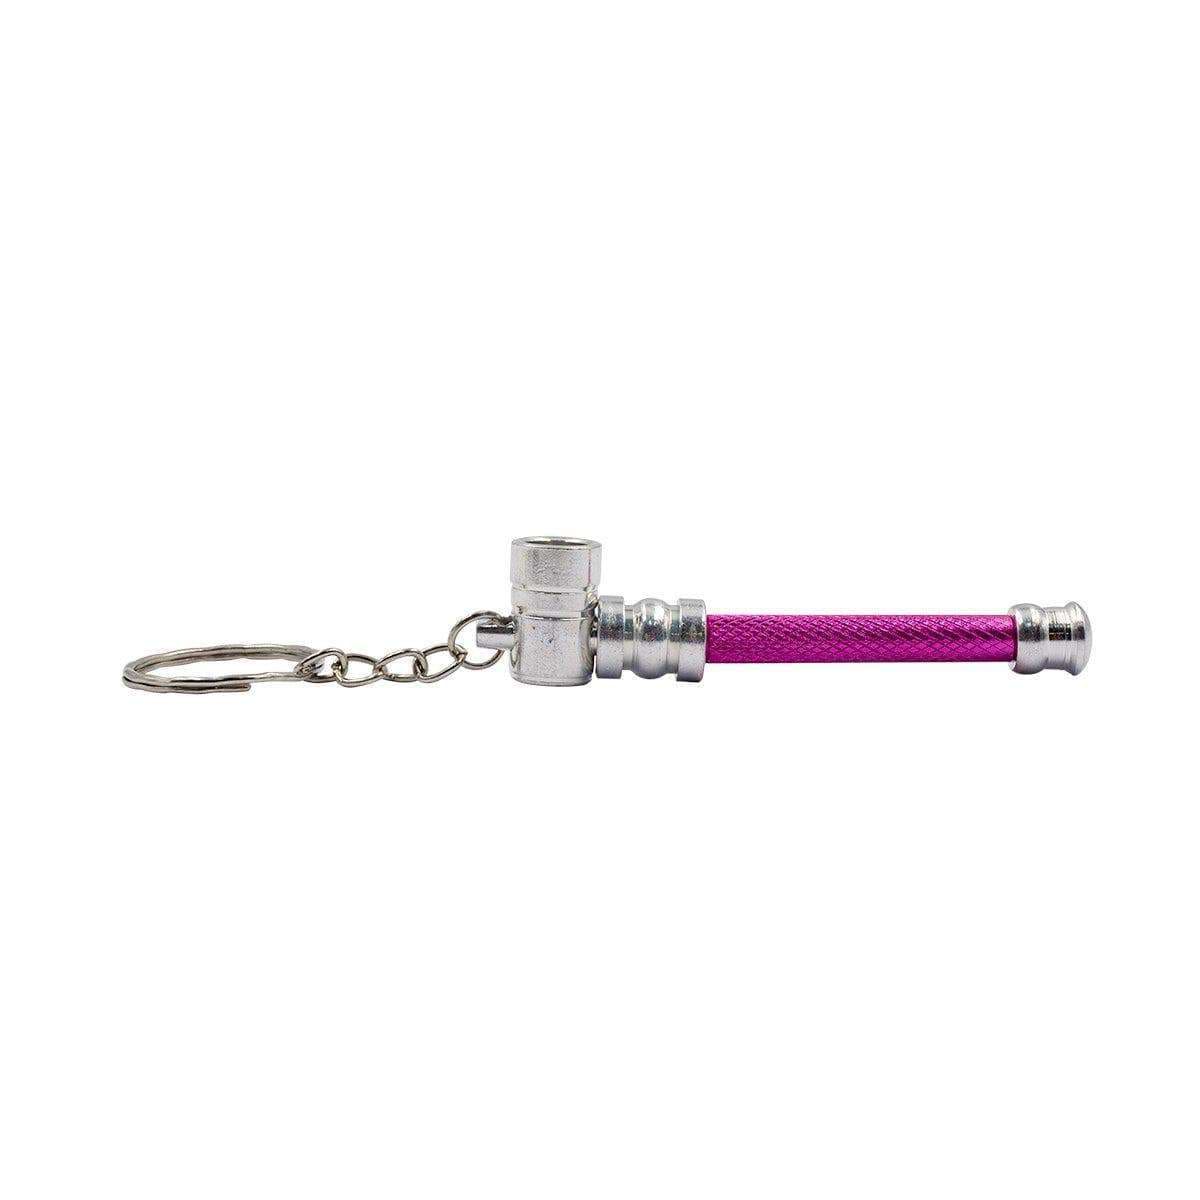 Horizontal Mini keychain pipe in a cylinder hammer-like shape Pink colors stainless steel both ends with keyring